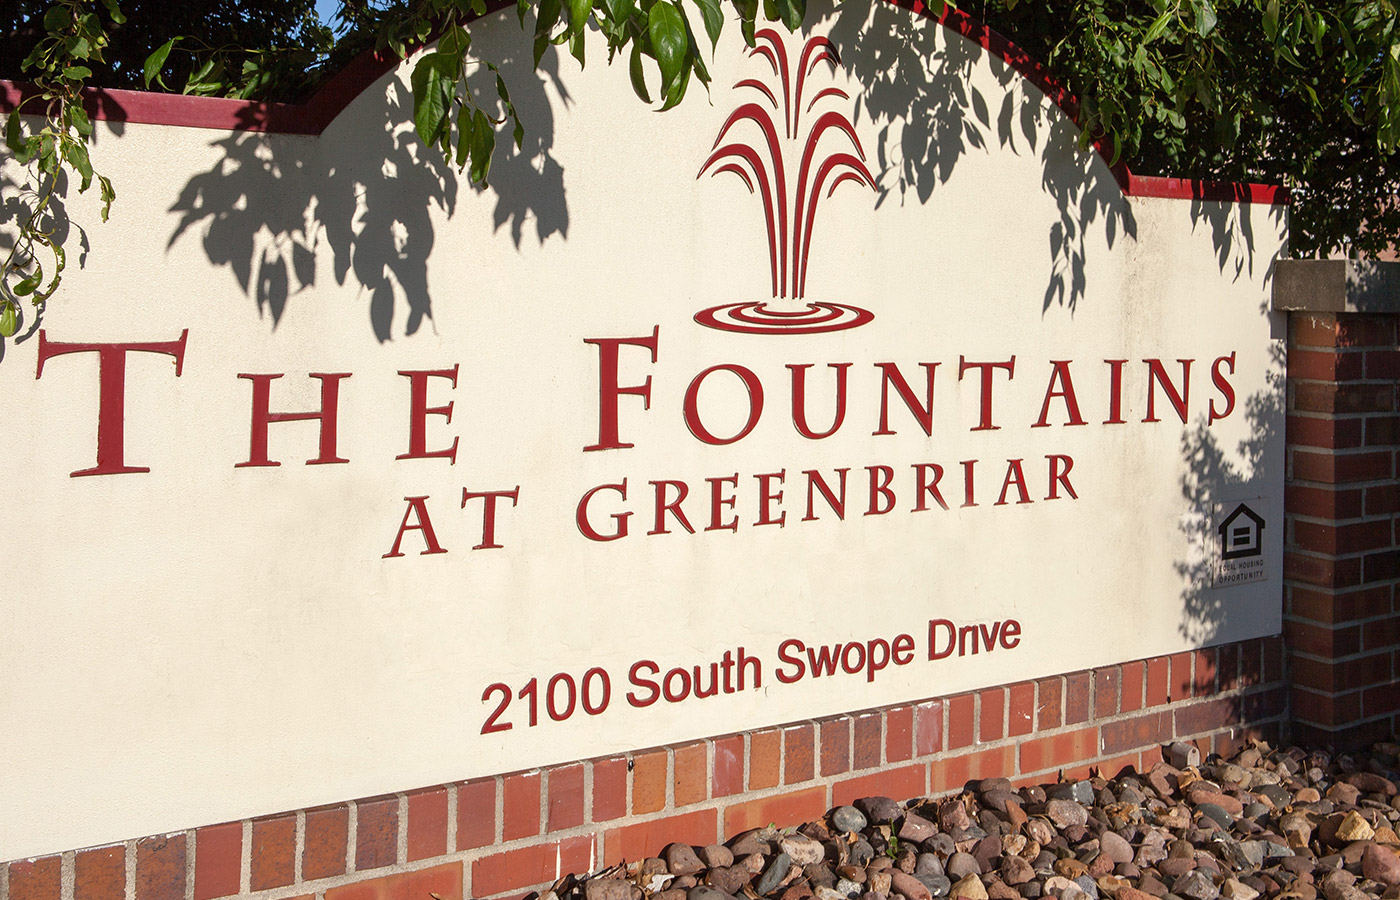 The Fountains at Greenbriar sign.